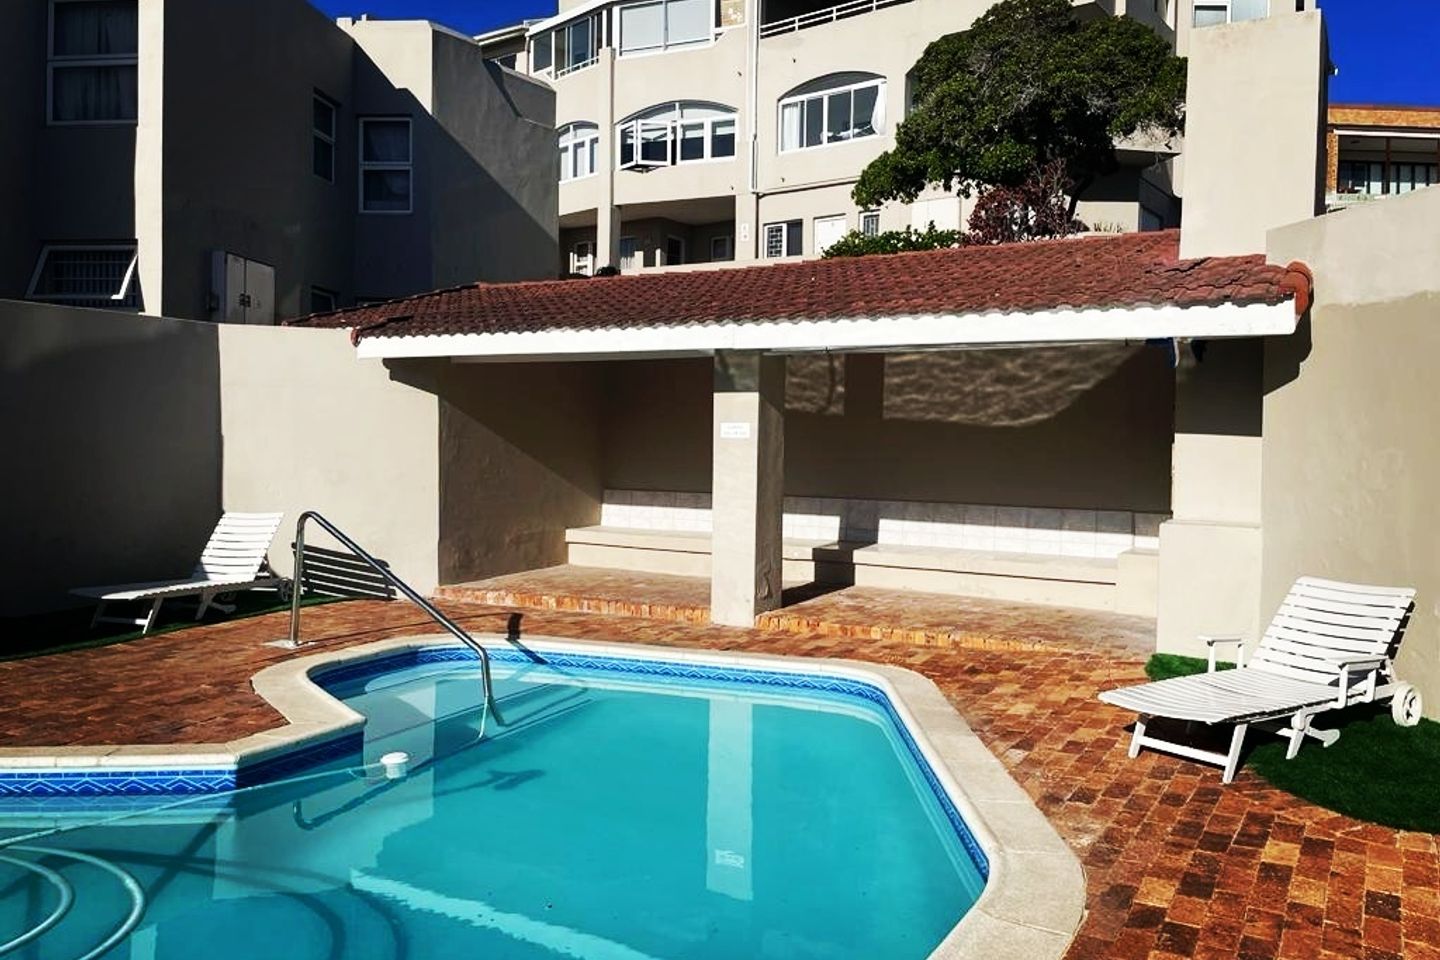 Luxury 1 Bed Apartment For Sale In Melkbosstrand Cape Town South Africa, Cape Town, Western Cape, South Africa